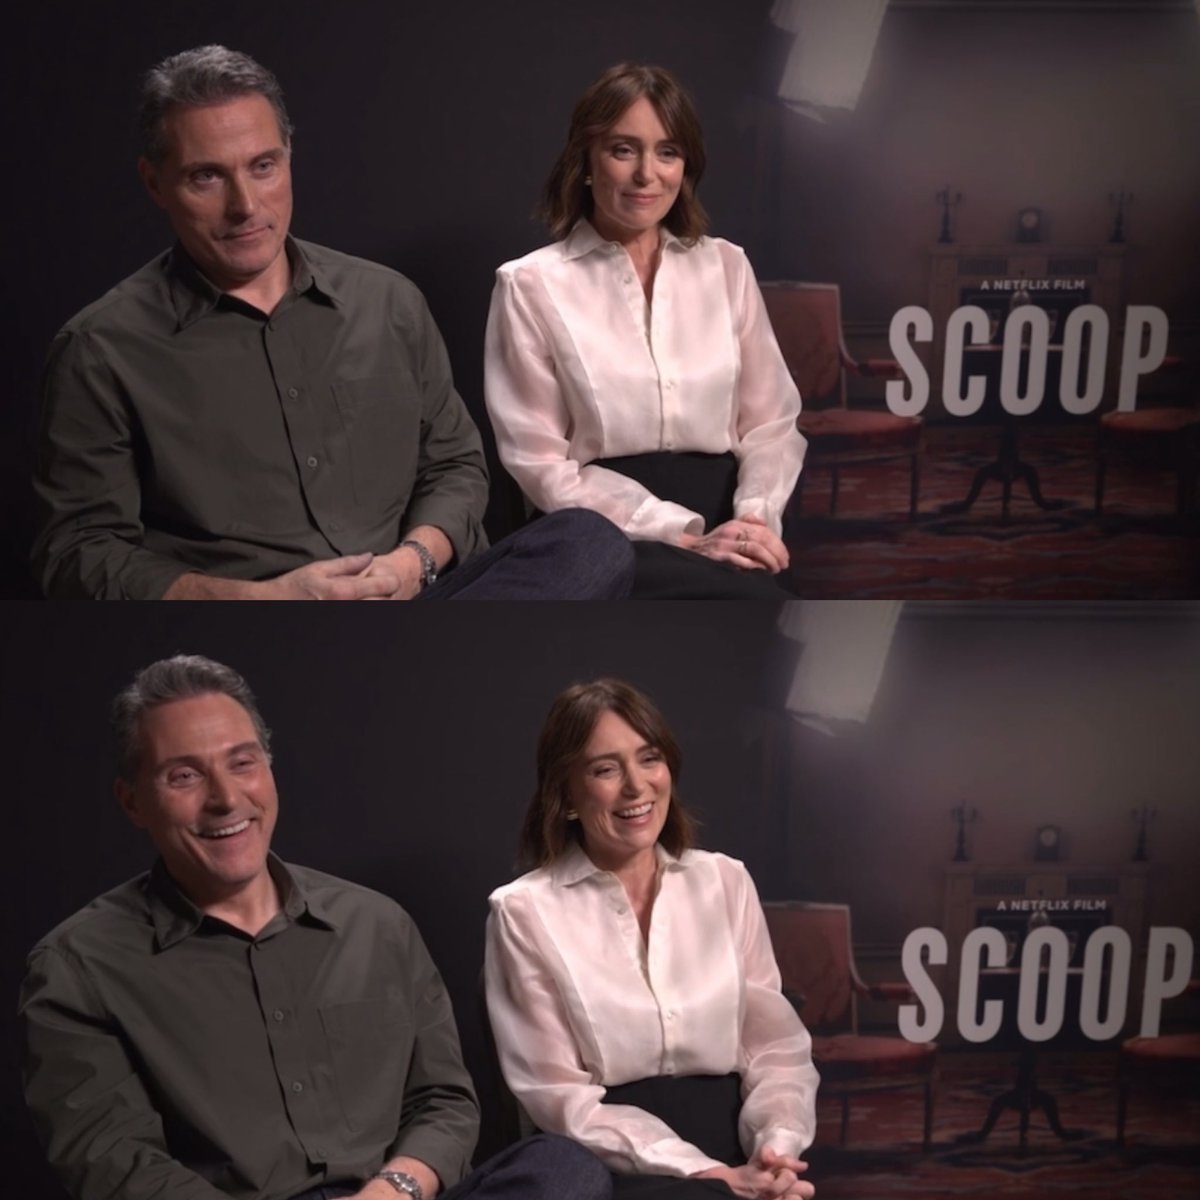 #Scoop interview with Keeley and Rufus Sewell 🎙️

uk.news.yahoo.com/interviews-sco… 

#keeleyhawes #rufussewell